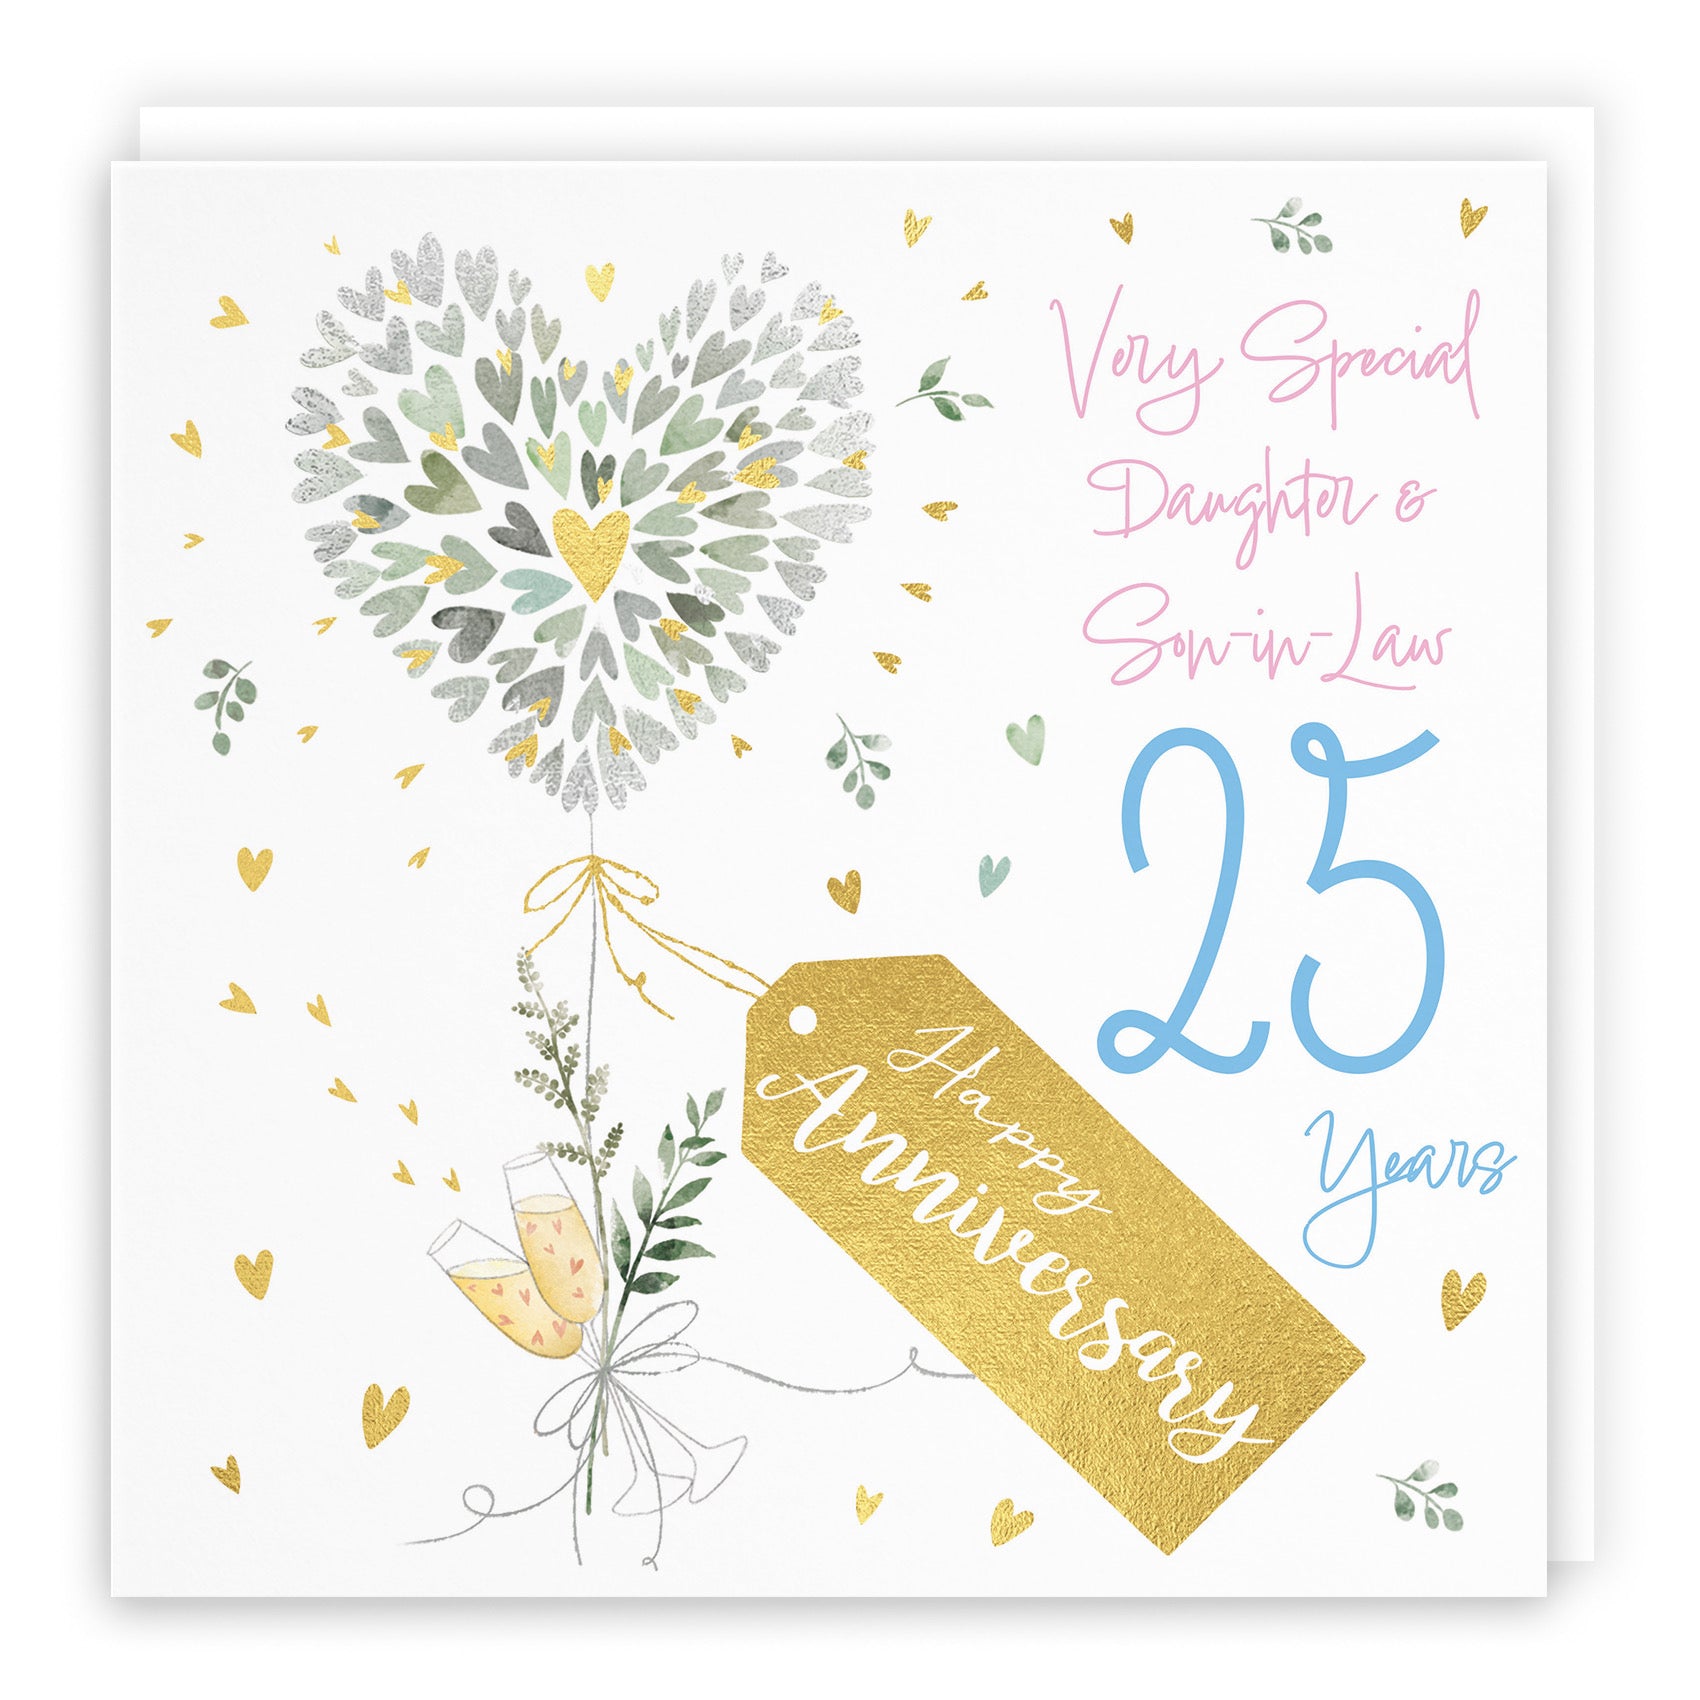 Daughter And Son-in-Law 25th Anniversary Card Contemporary Hearts Milo's Gallery - Default Title (B0CKJ836PR)